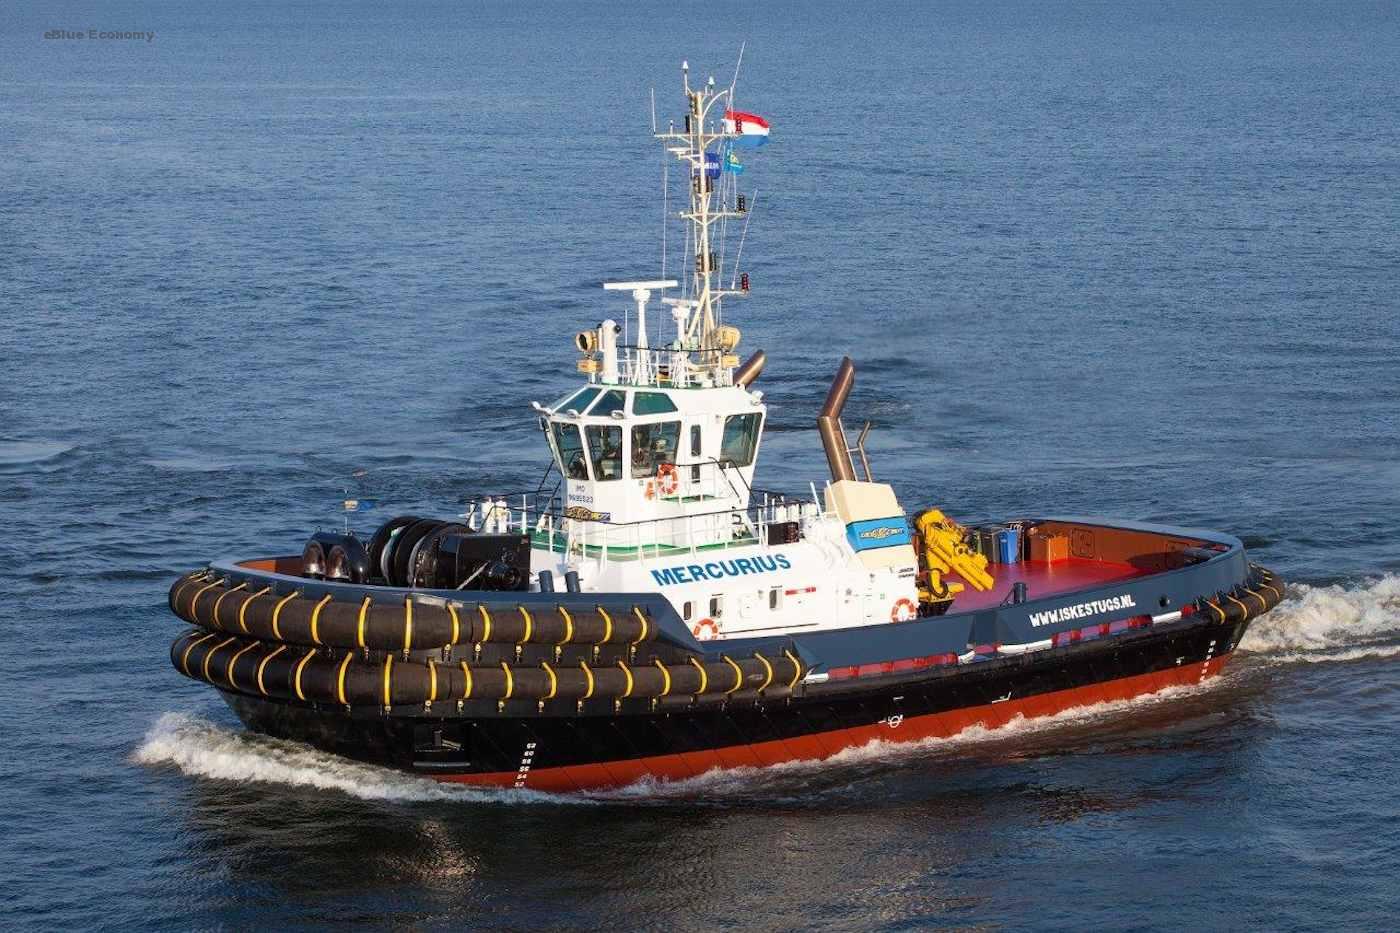 eBlue_economy_Tugs Towing & Offshore_Newsletter 28 2022-PDF